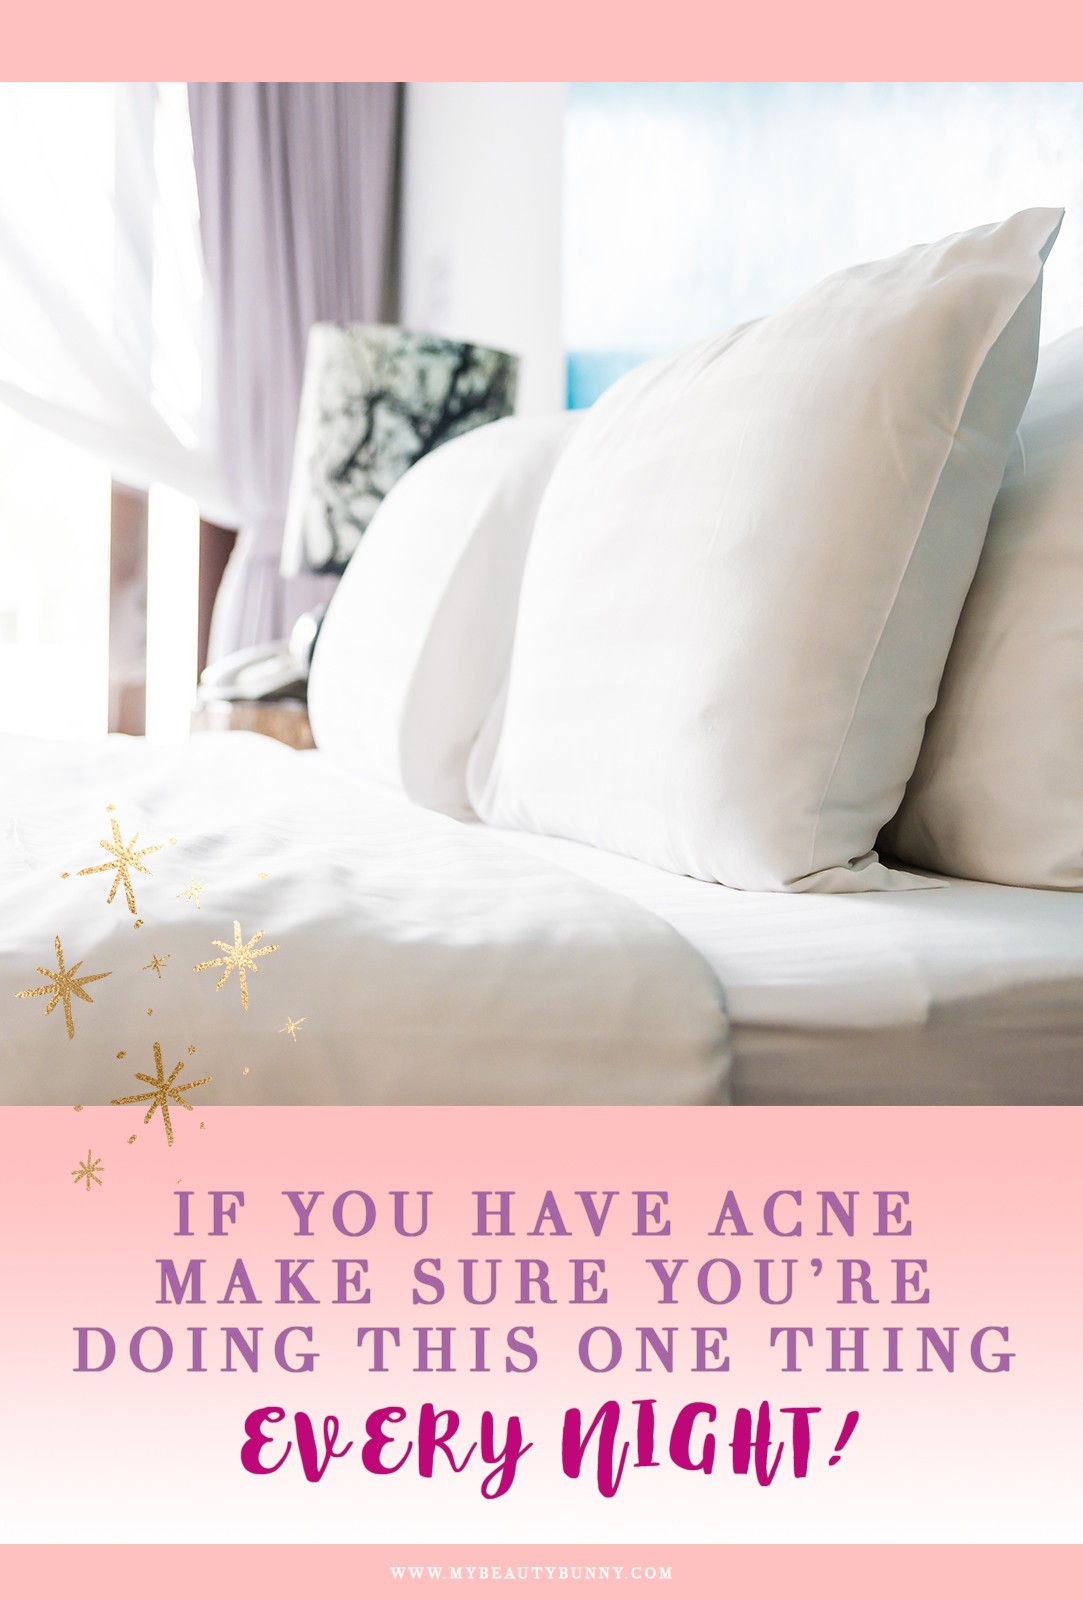 If you have acne make sure you do this one thing every night